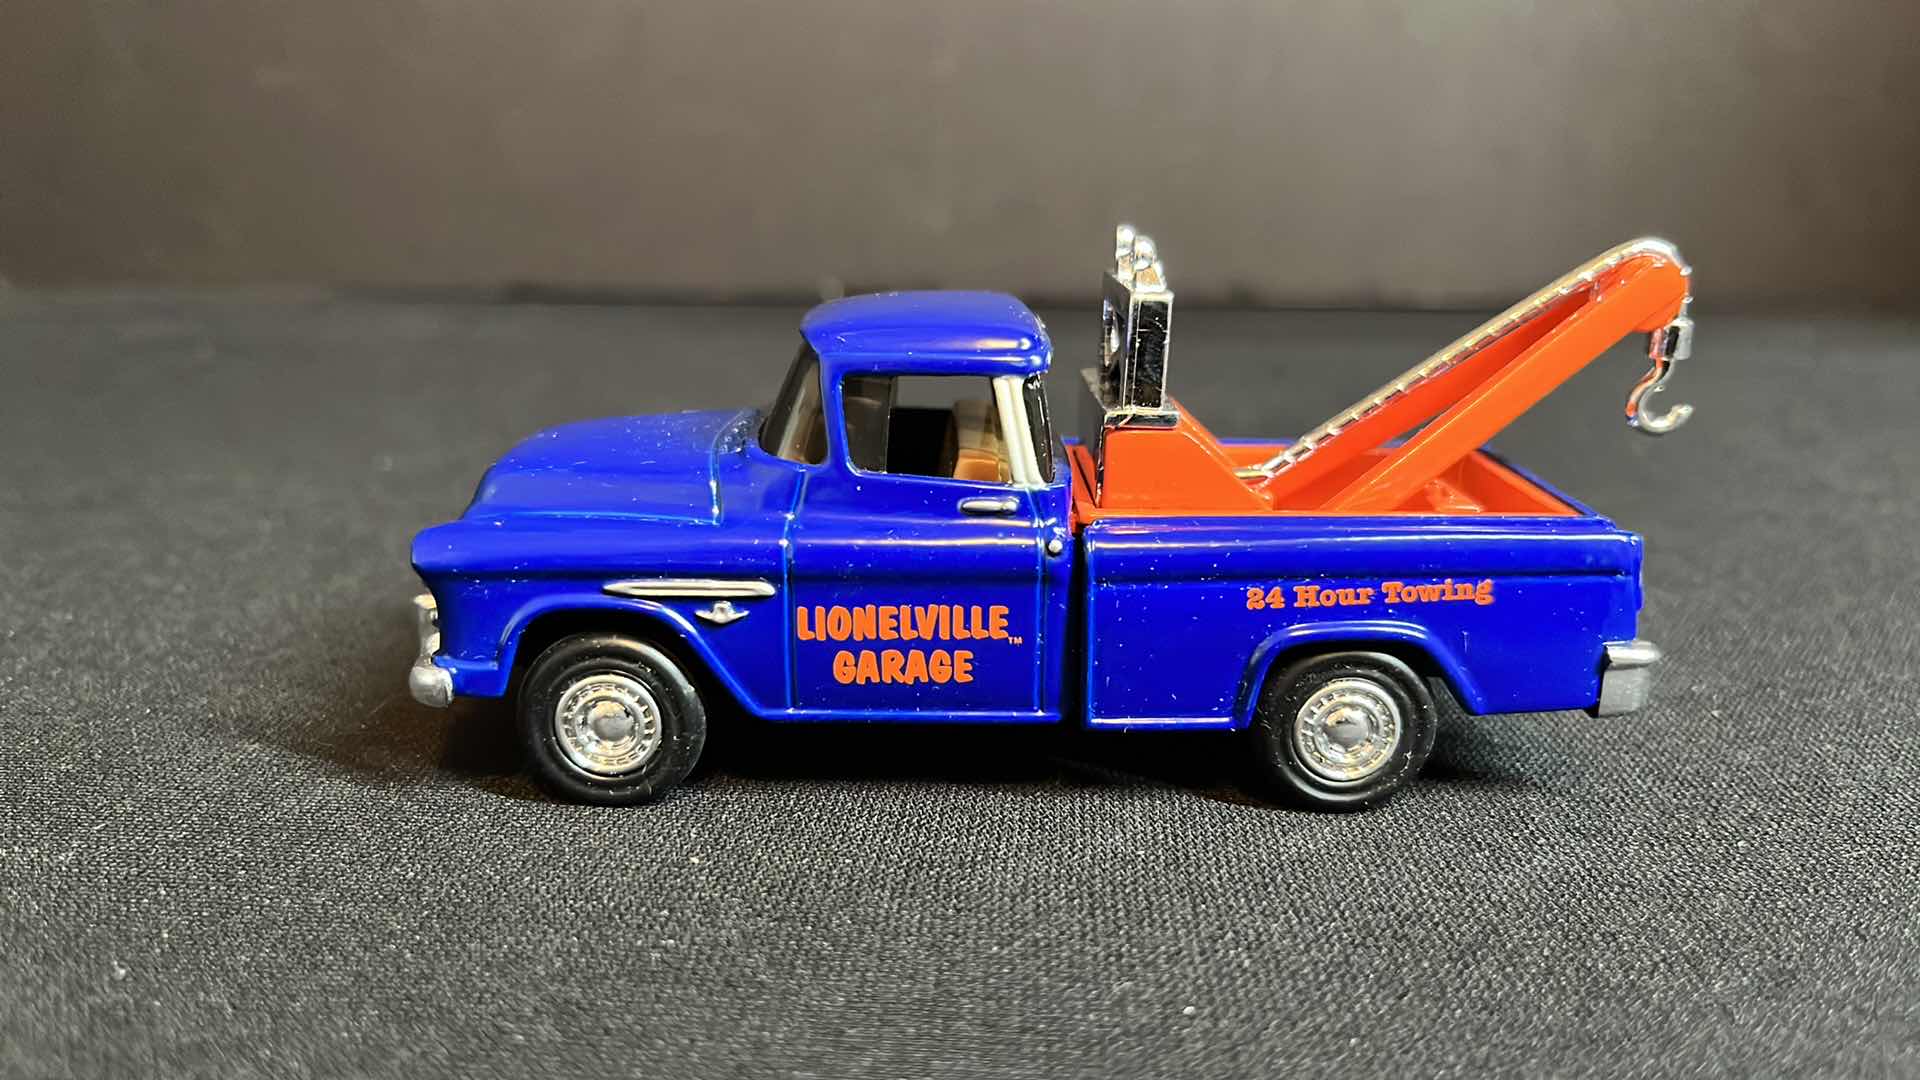 Photo 7 of NIB ERTL COMPANY EASTWOOD AUTOMOBILIA SET OF DIE-CAST METAL LIONEL 1913 FORD MODEL T DELIVERY/EMERGENCY VAN & CHEVROLET LIONELVILLE GARAGE 24 HOUR TOWING WRECKER, 1994 (STOCK #B518)